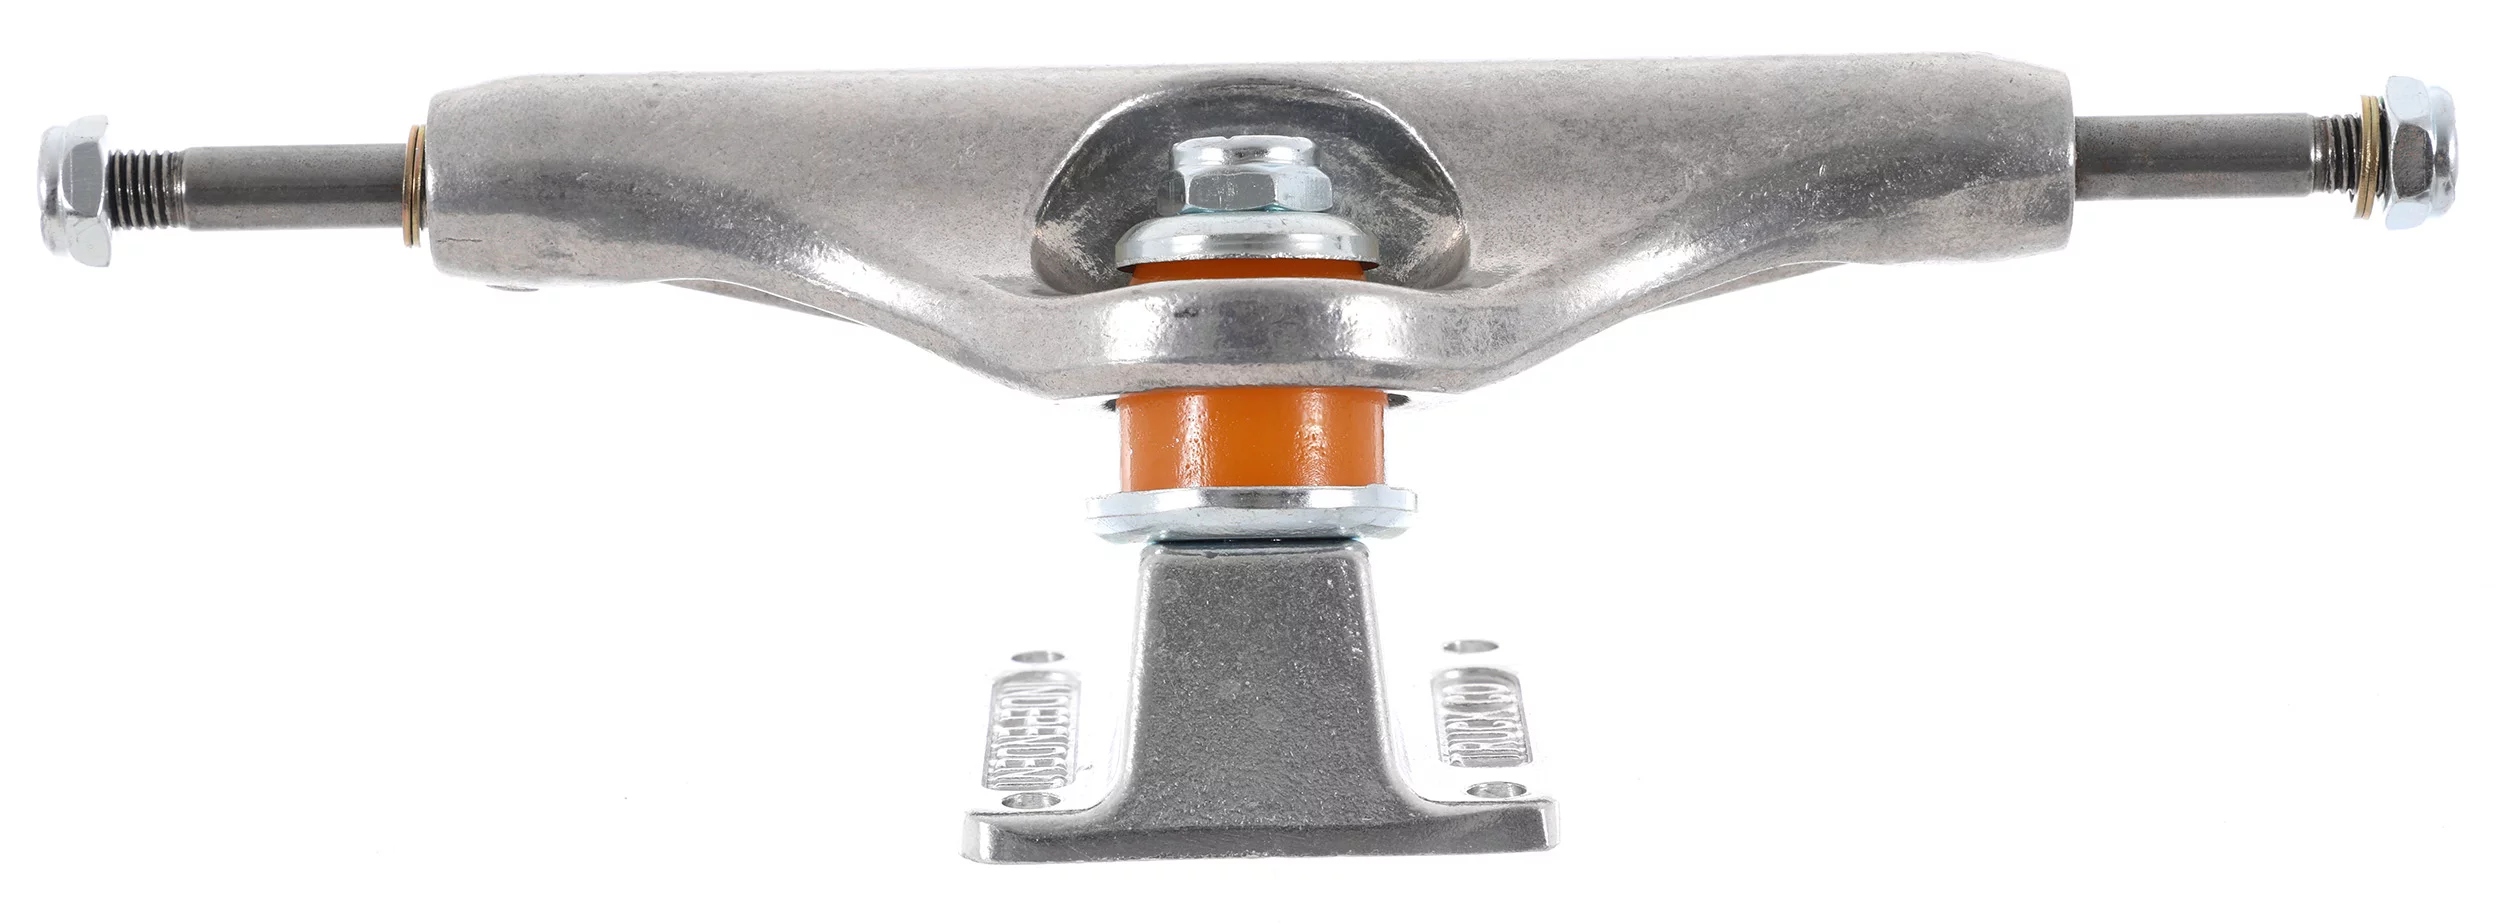 Forged Hollow Stage 11 Skateboard Trucks